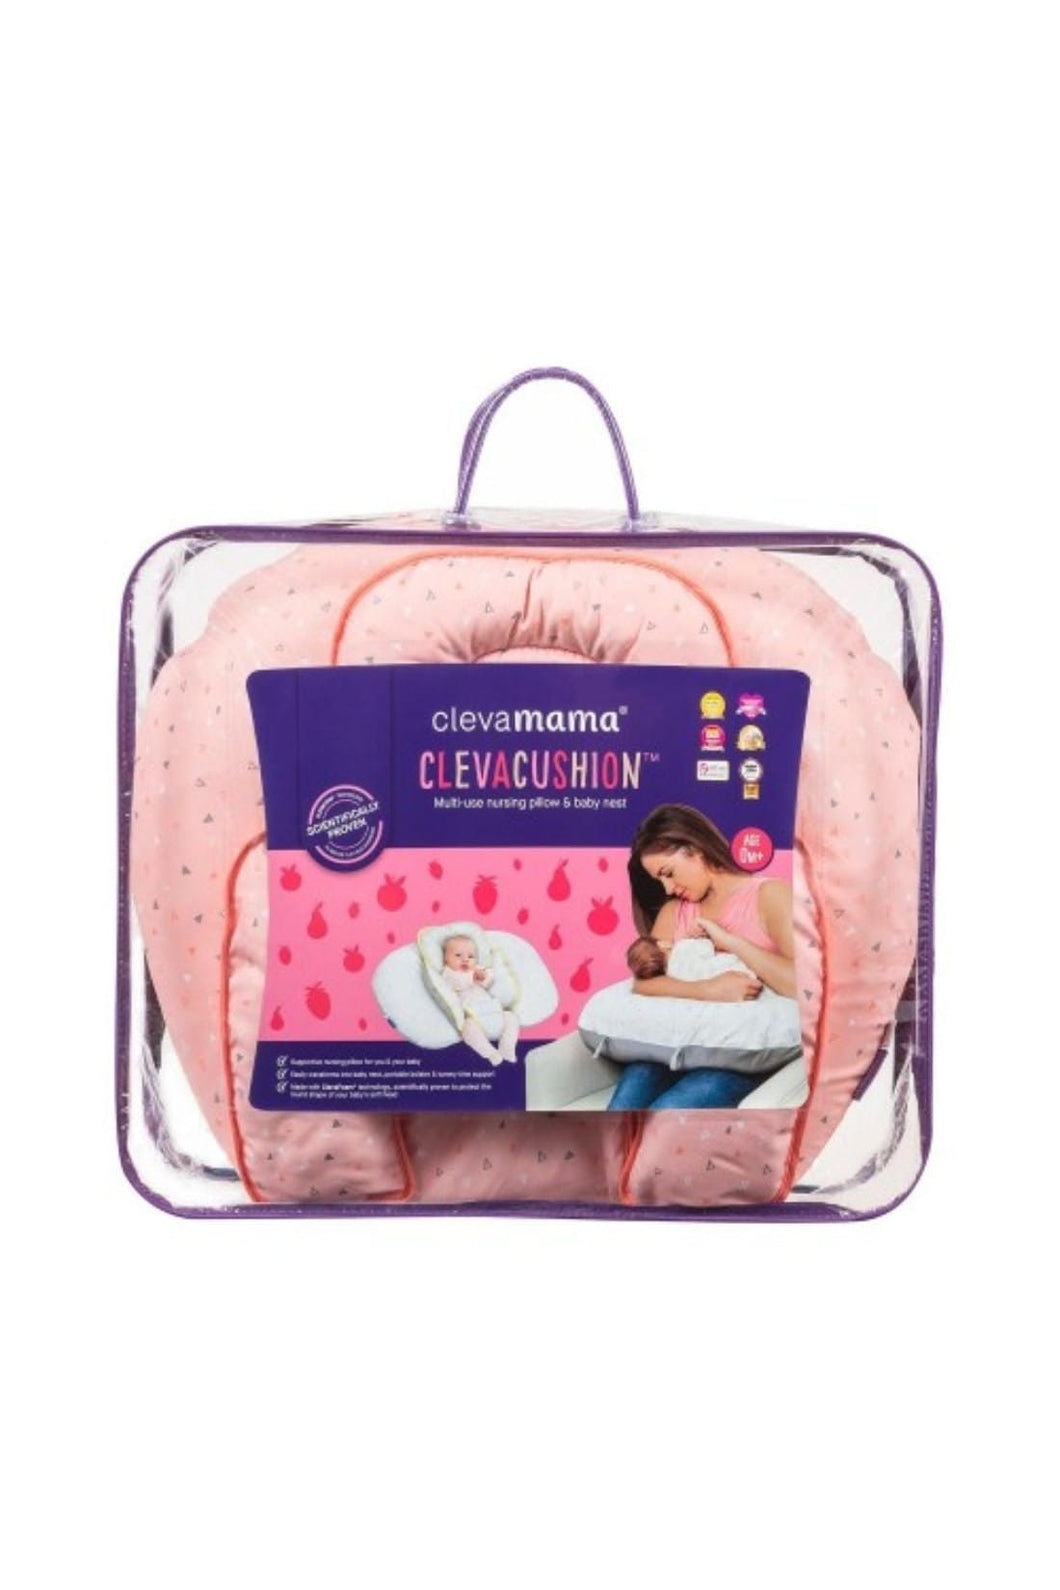 Clevamama Clevacushion Nursing Pillow And Baby Nest Coral 1